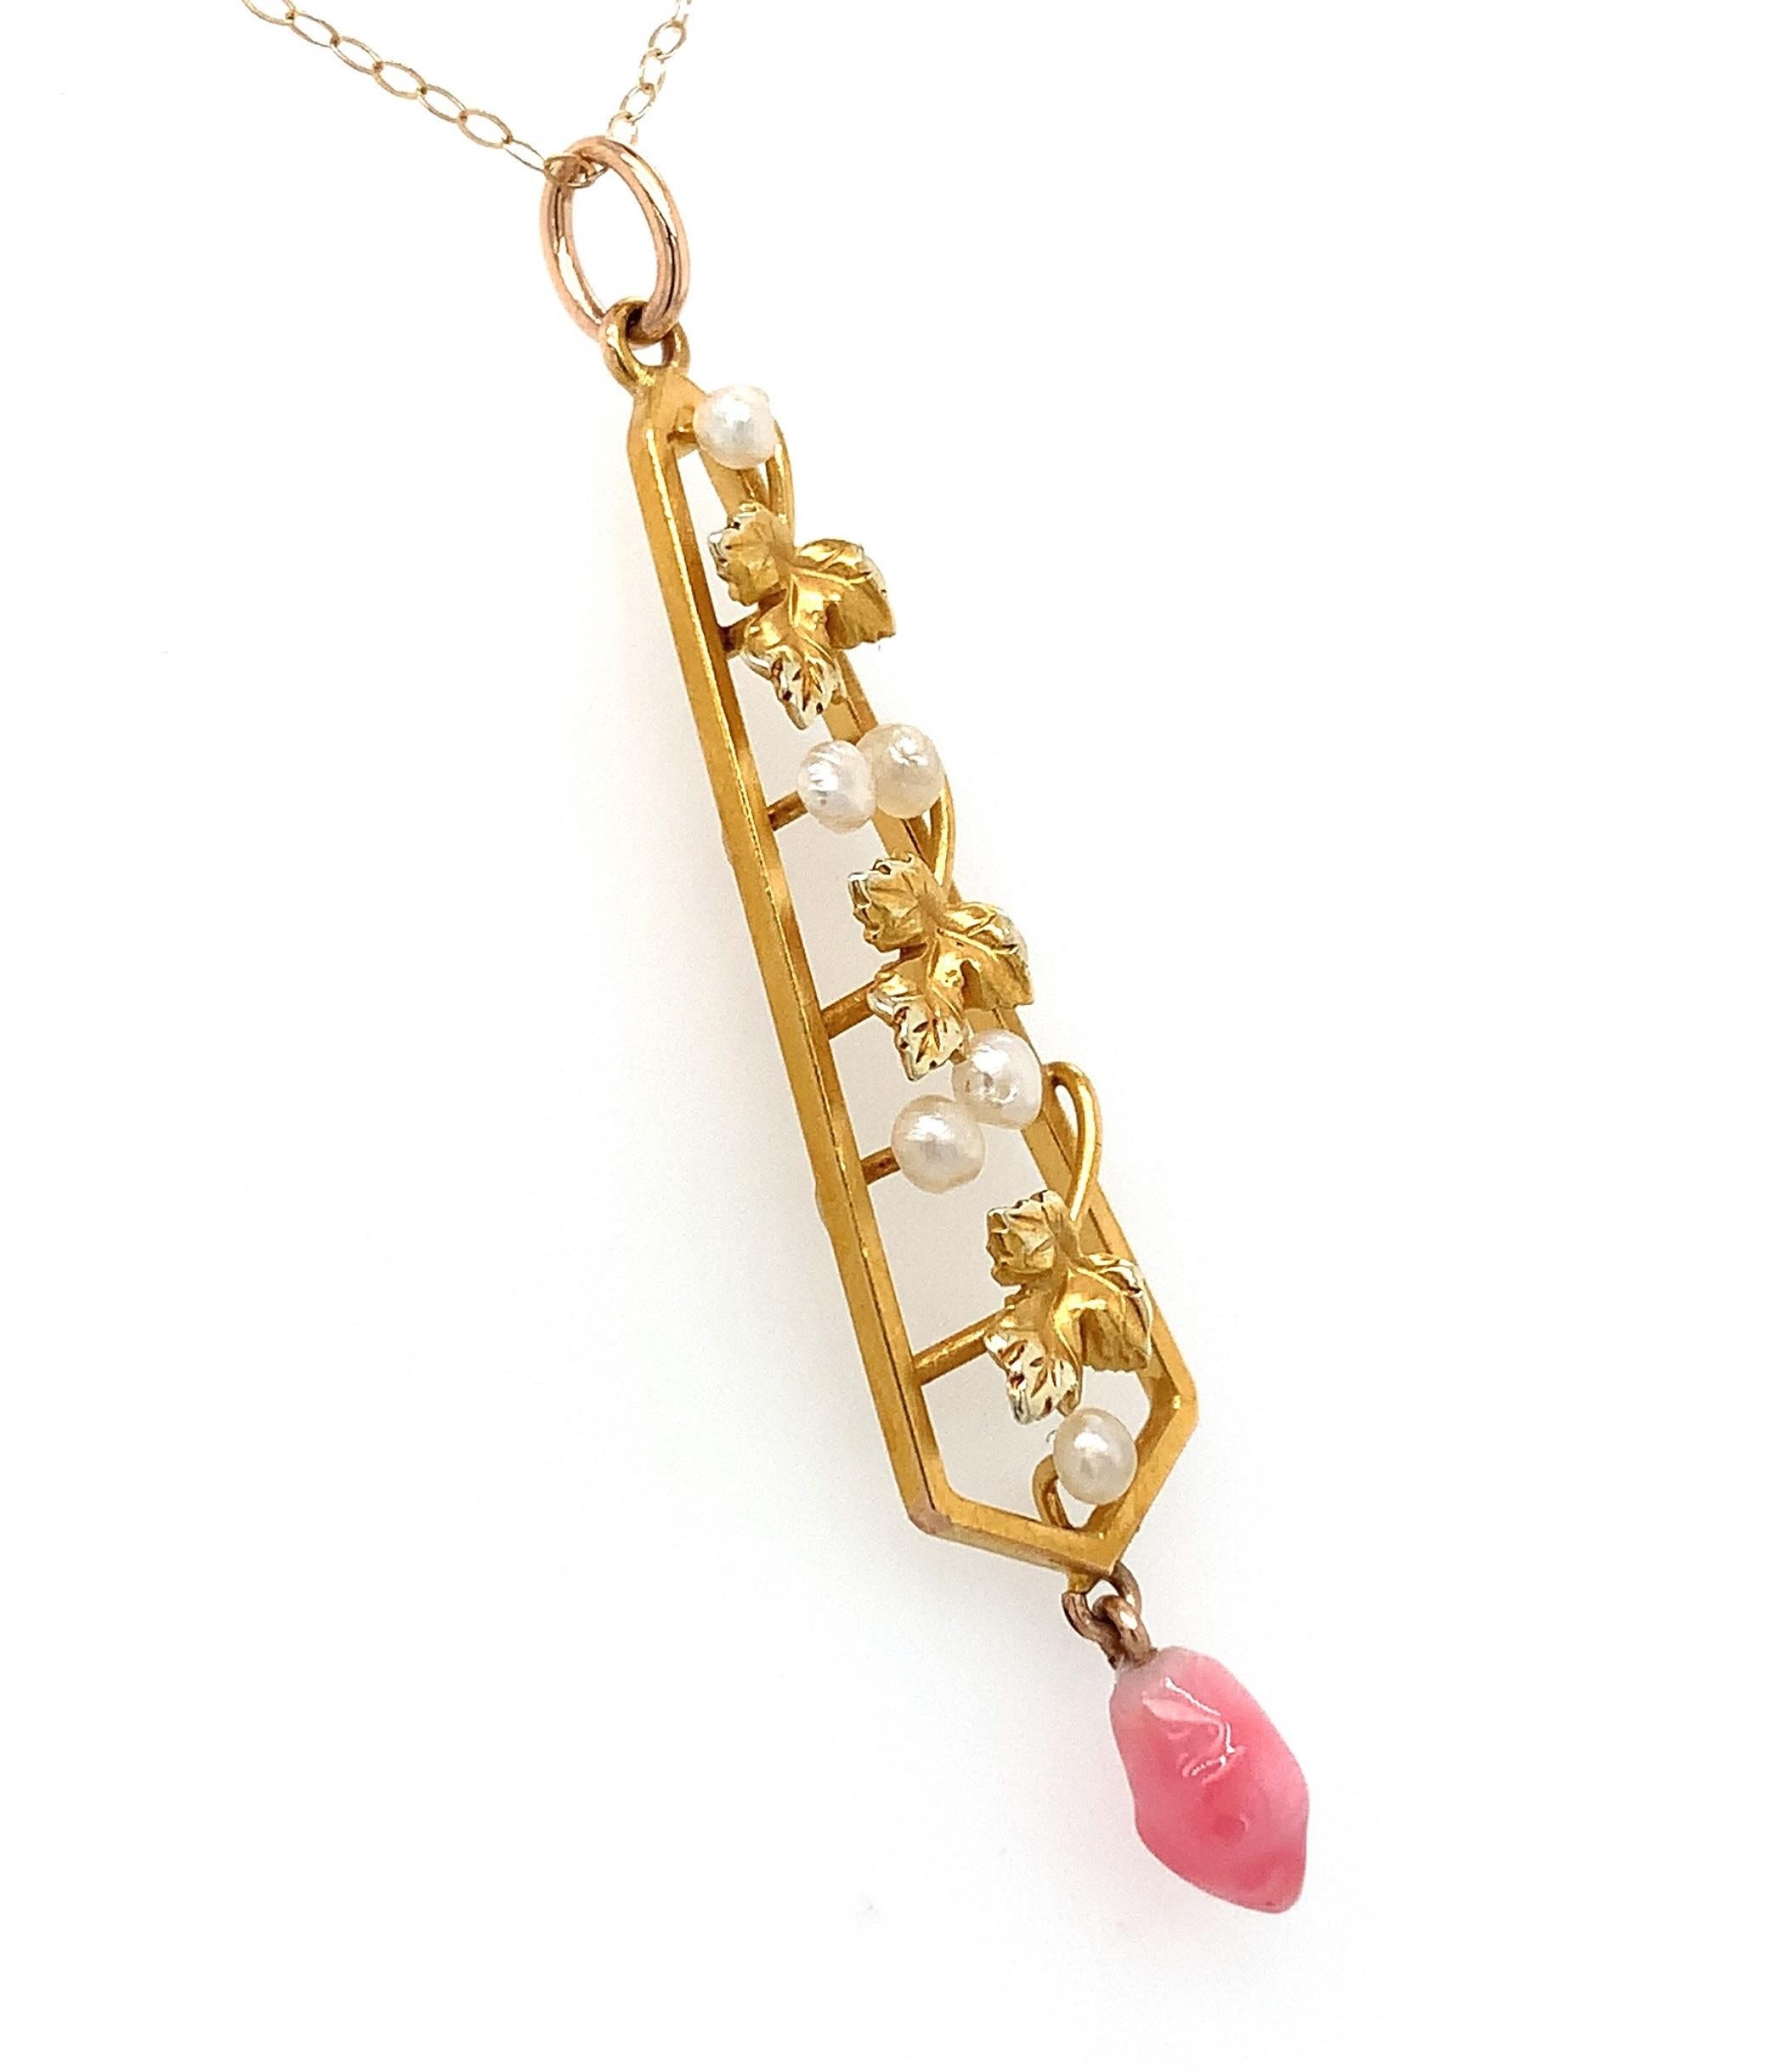  10K yellow gold Art Nouveau lavalier pendant featuring a conch pearl drop. The pink conch pearl weighs .74ct and measures 7.3mm x 3.8mm. It has bright bubble gum pink color and shows flame structure. The pendant measures 1 7/8